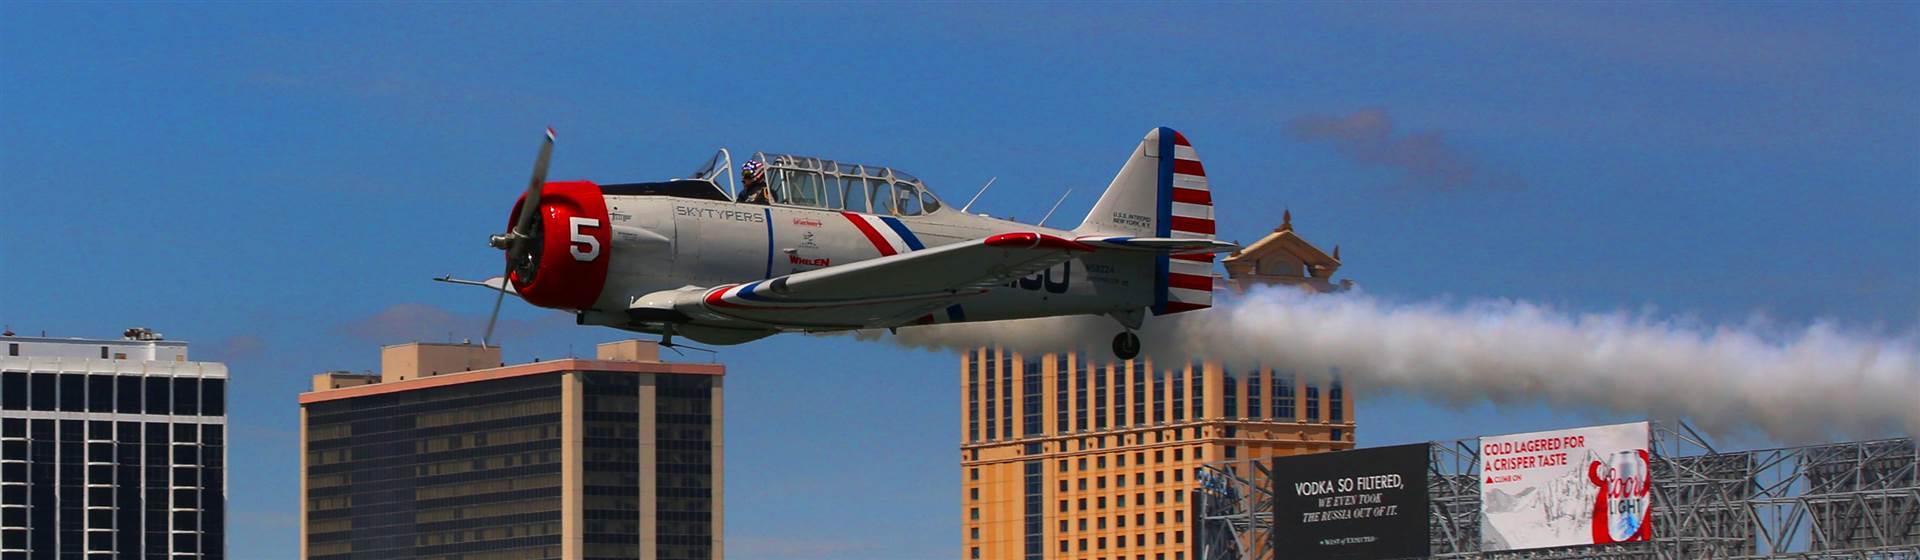 Atlantic City Airshow, Thunder over the Boardwalk!